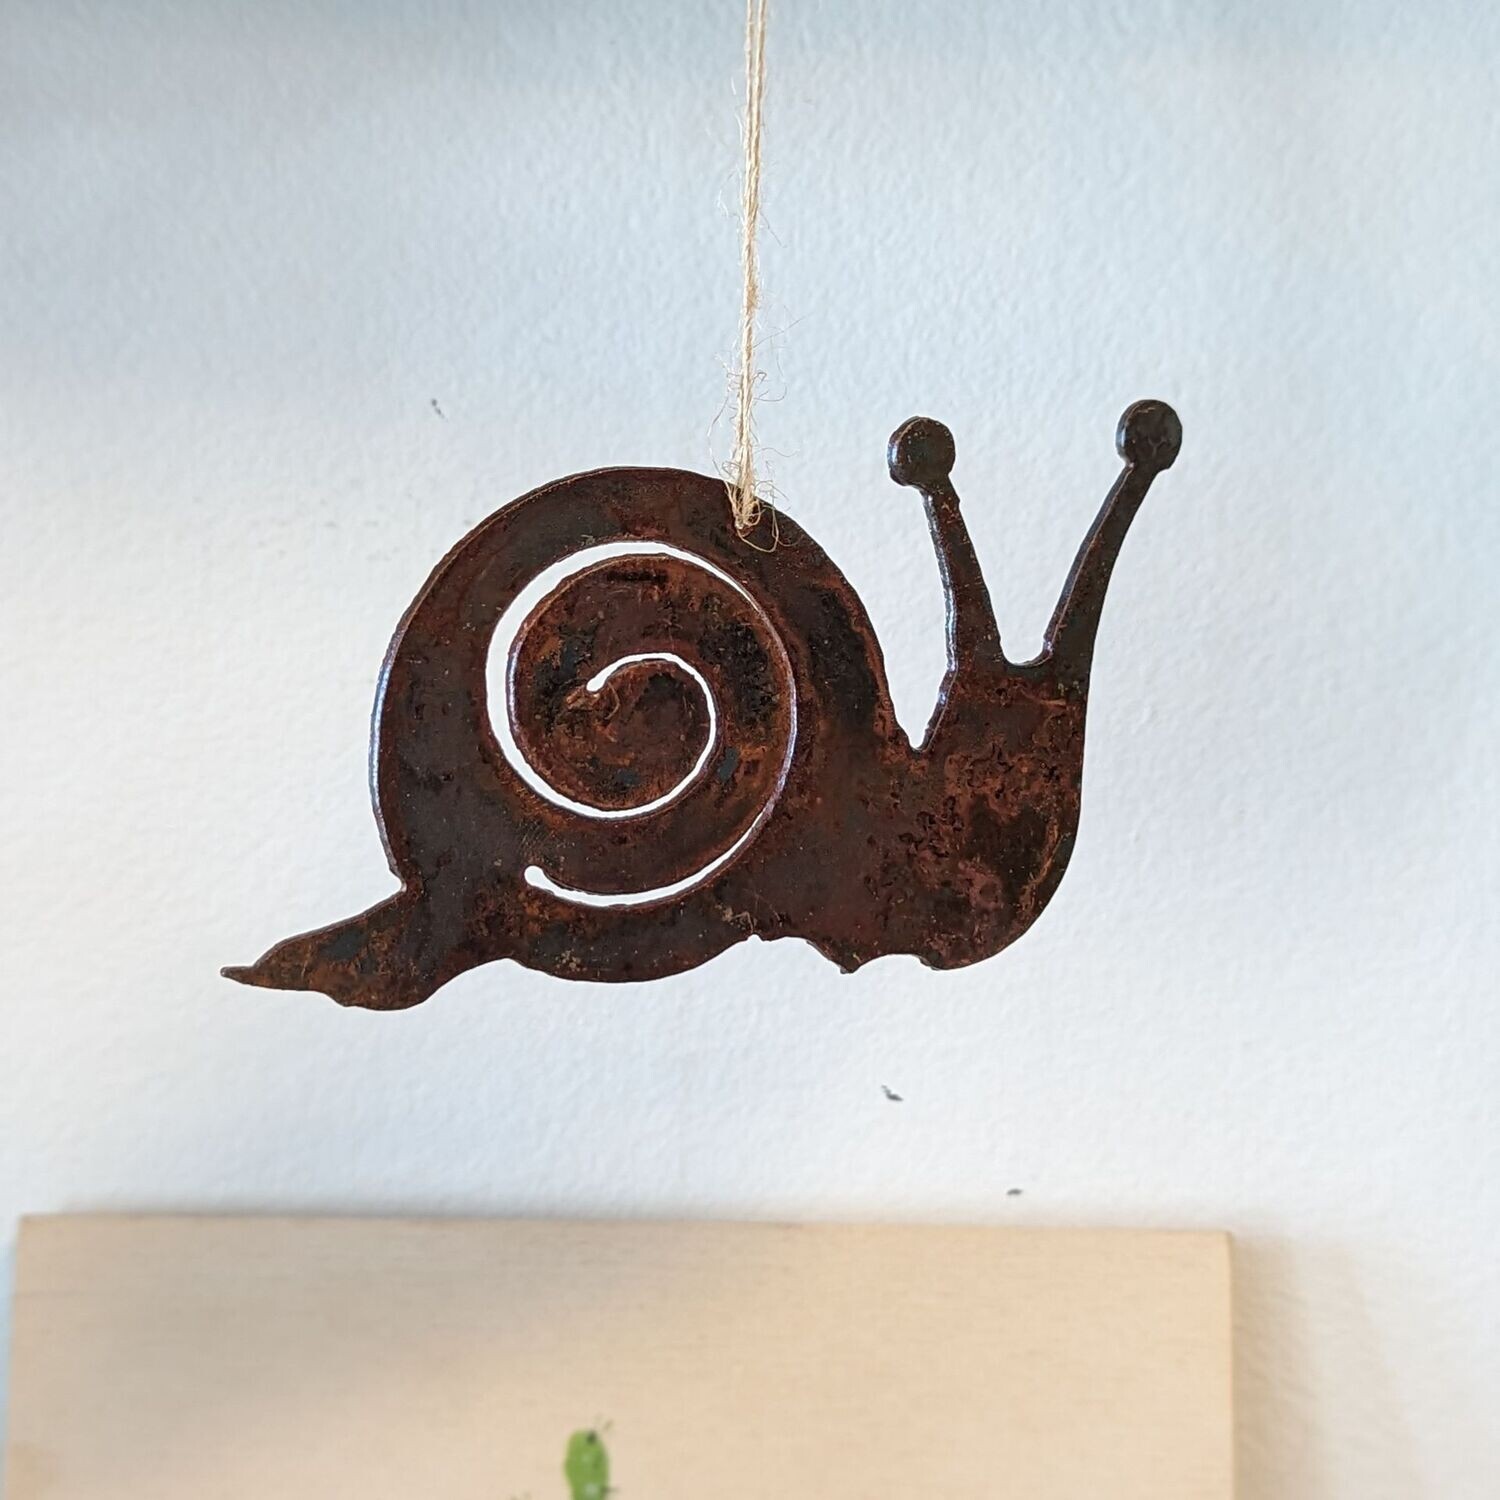 Rusted Snail Ornament